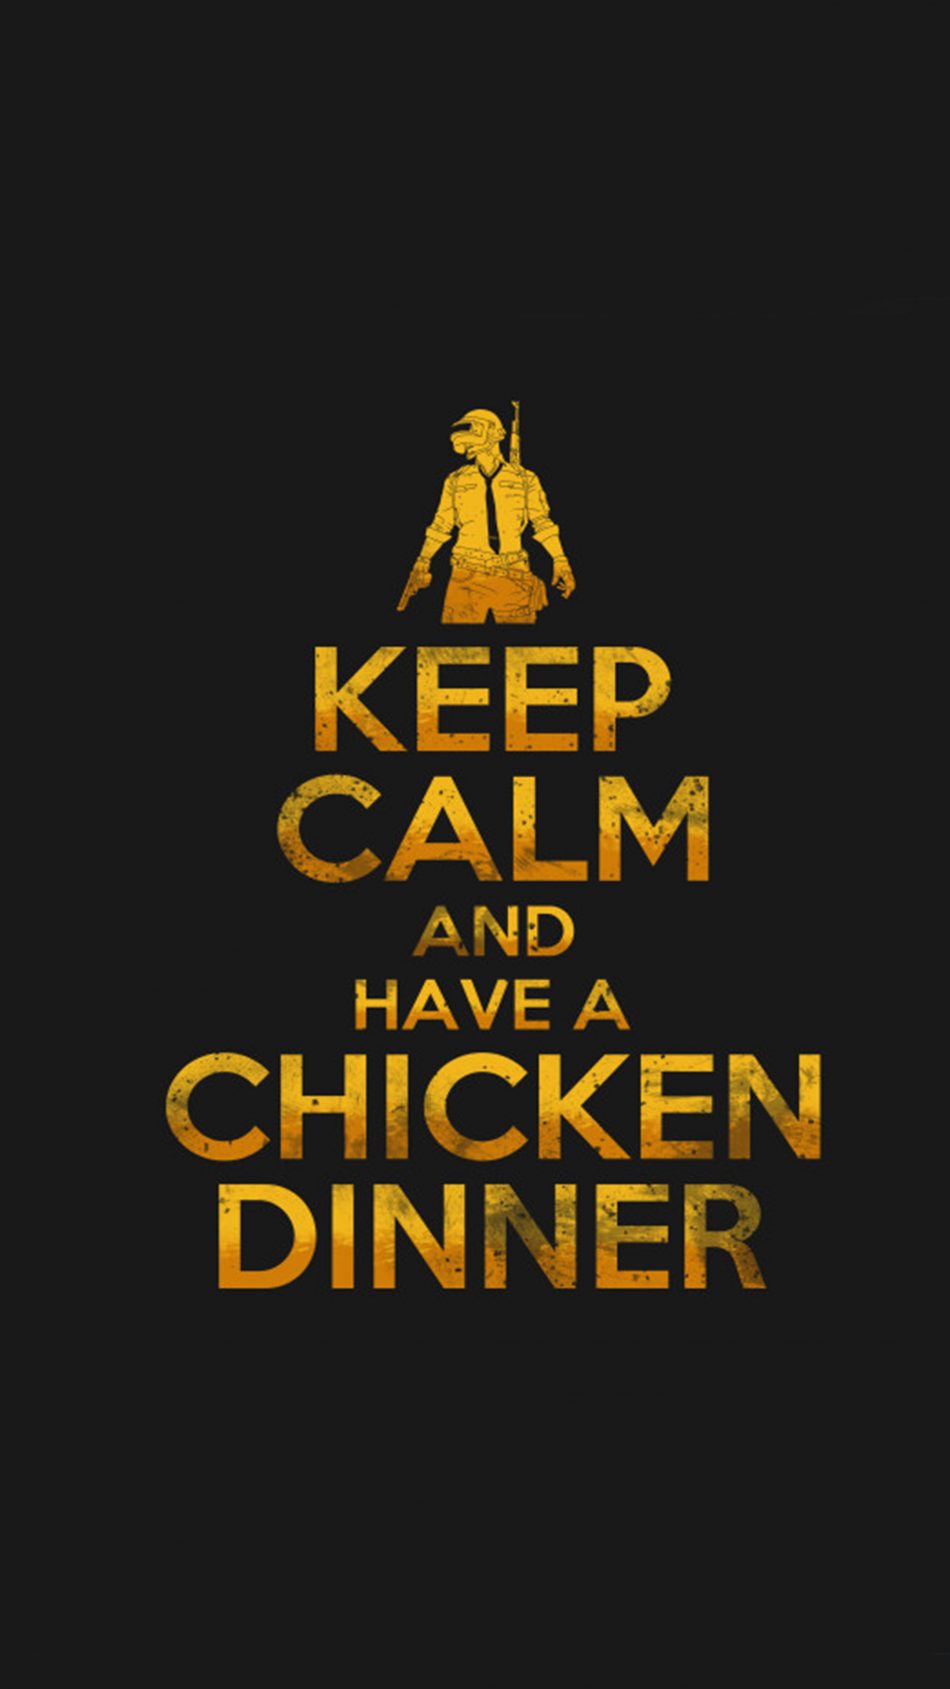 PUBG Keep Calm And Have A Chicken Dinner Free 4K Ultra HD Mobile